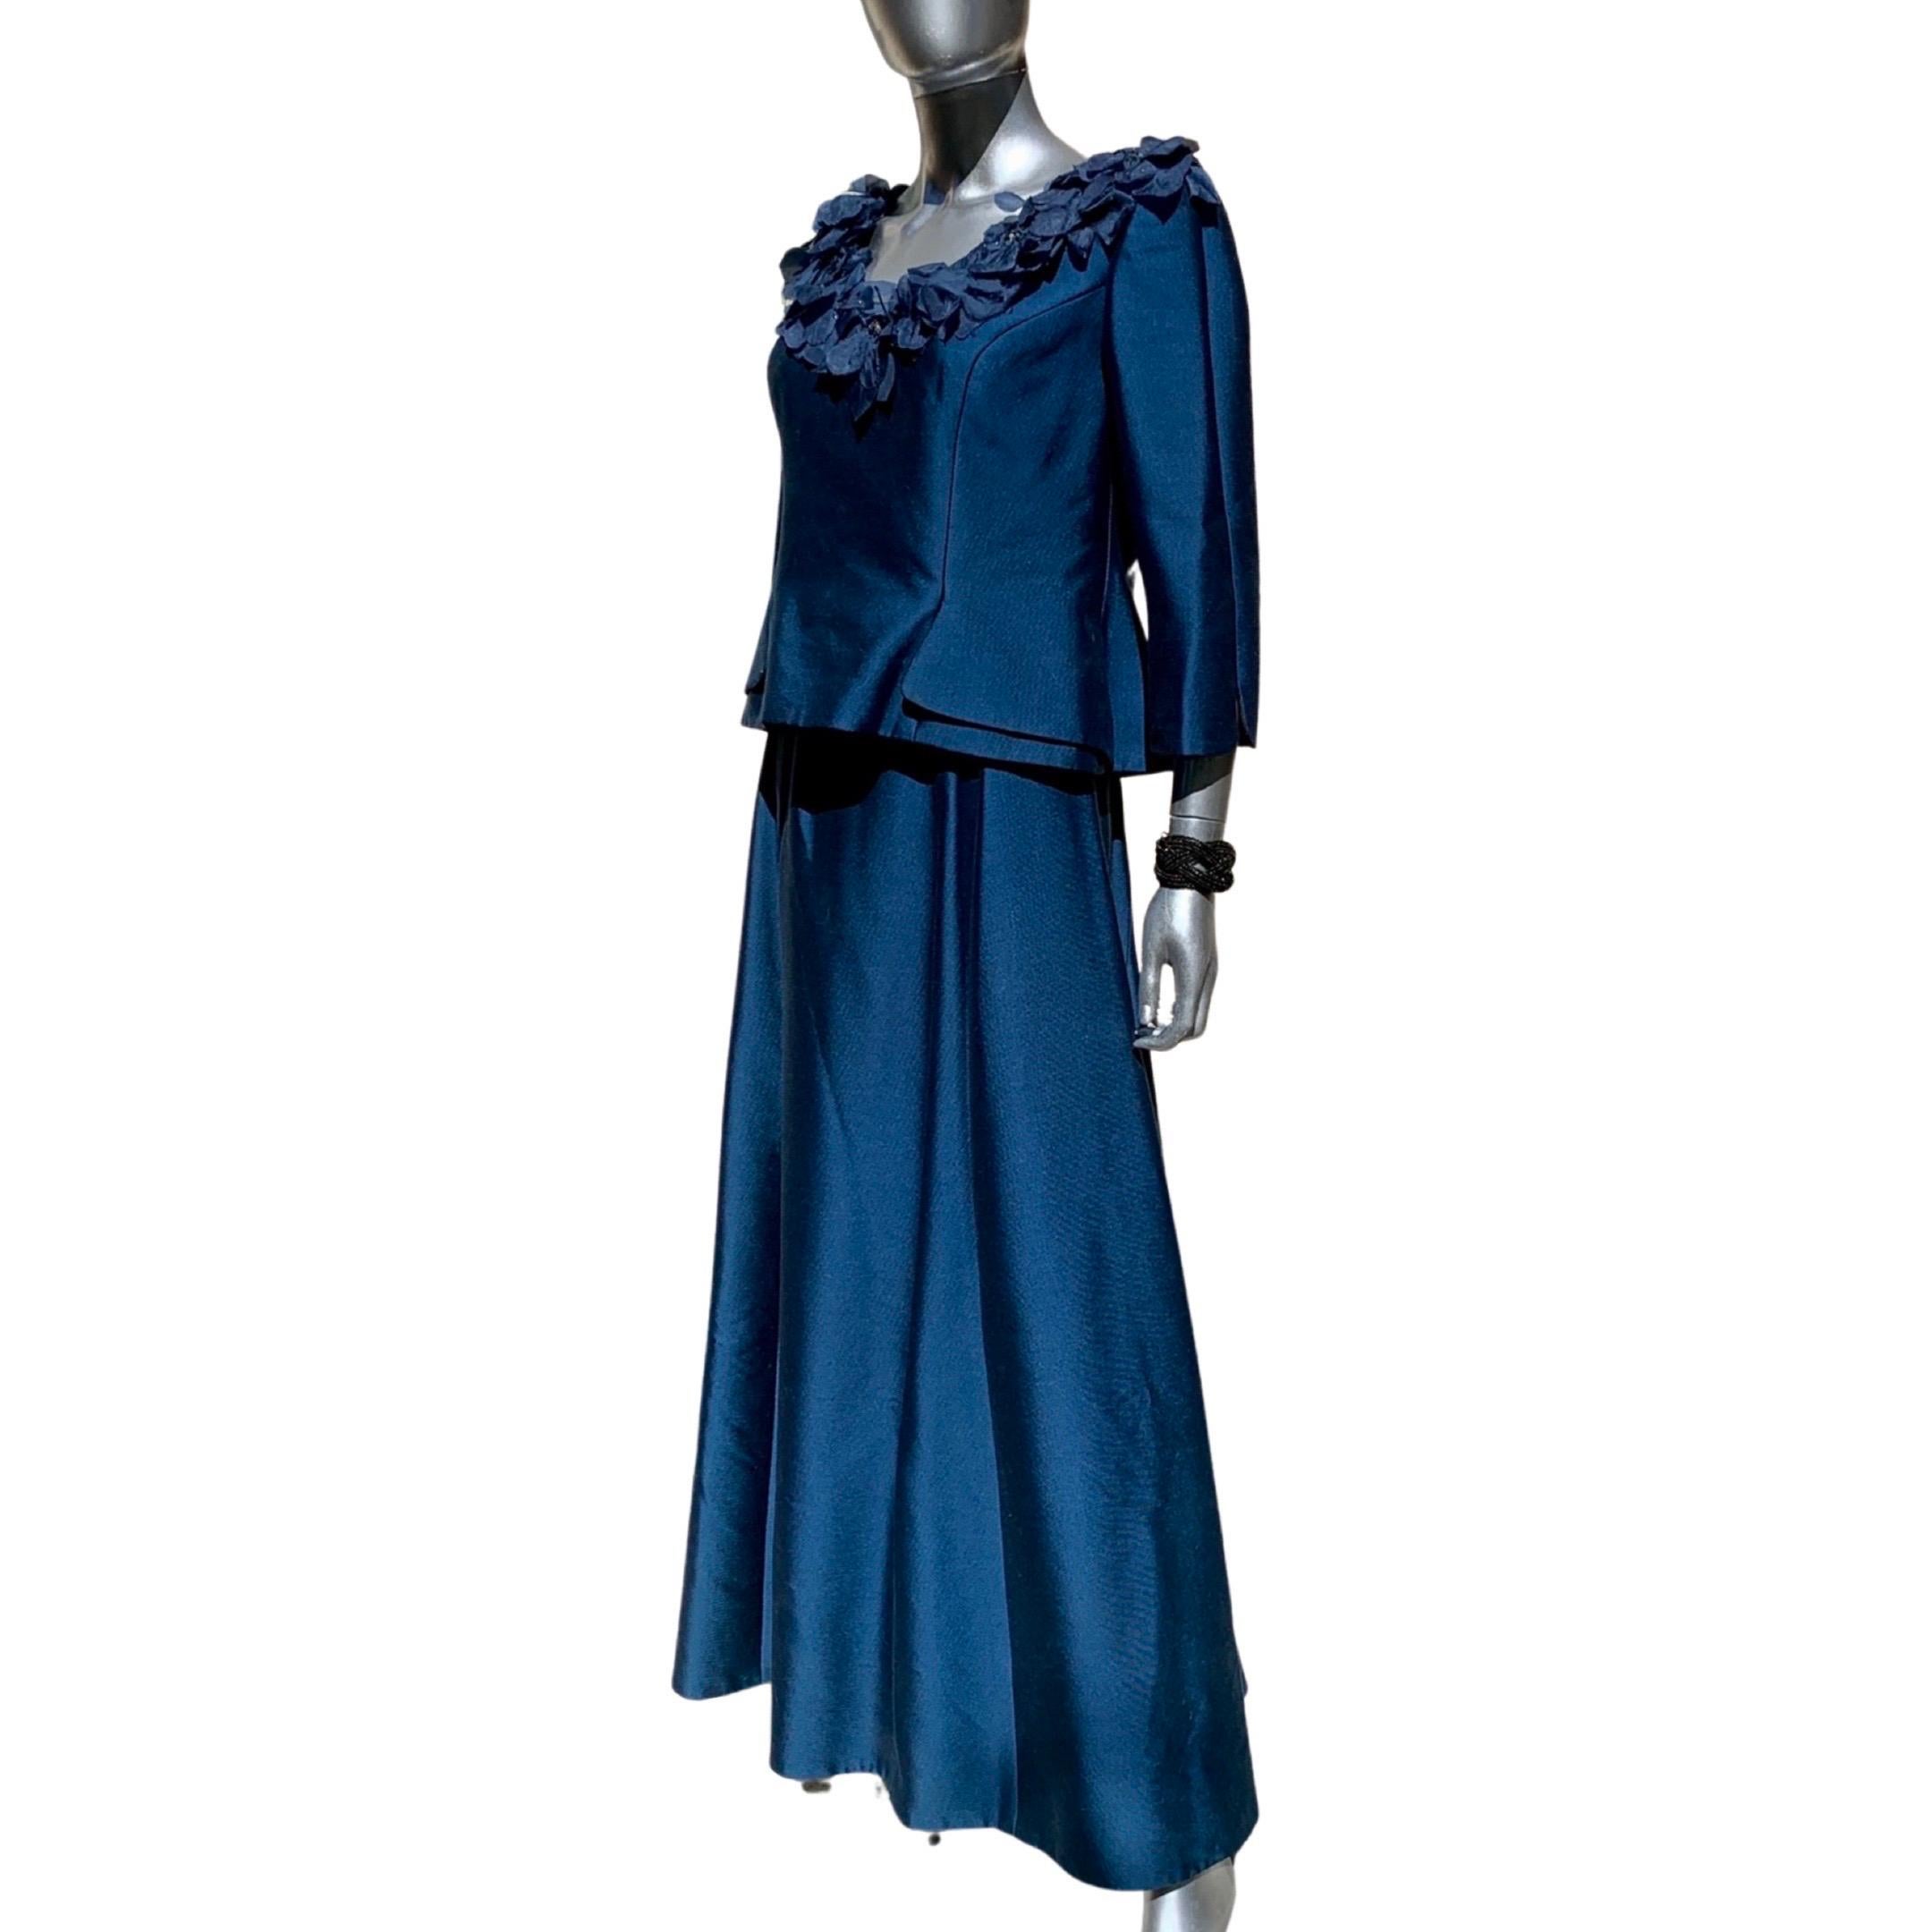 Three Piece Saphire Blue Couture Evening Ensemble by Lily Samii SF Size 8 For Sale 5